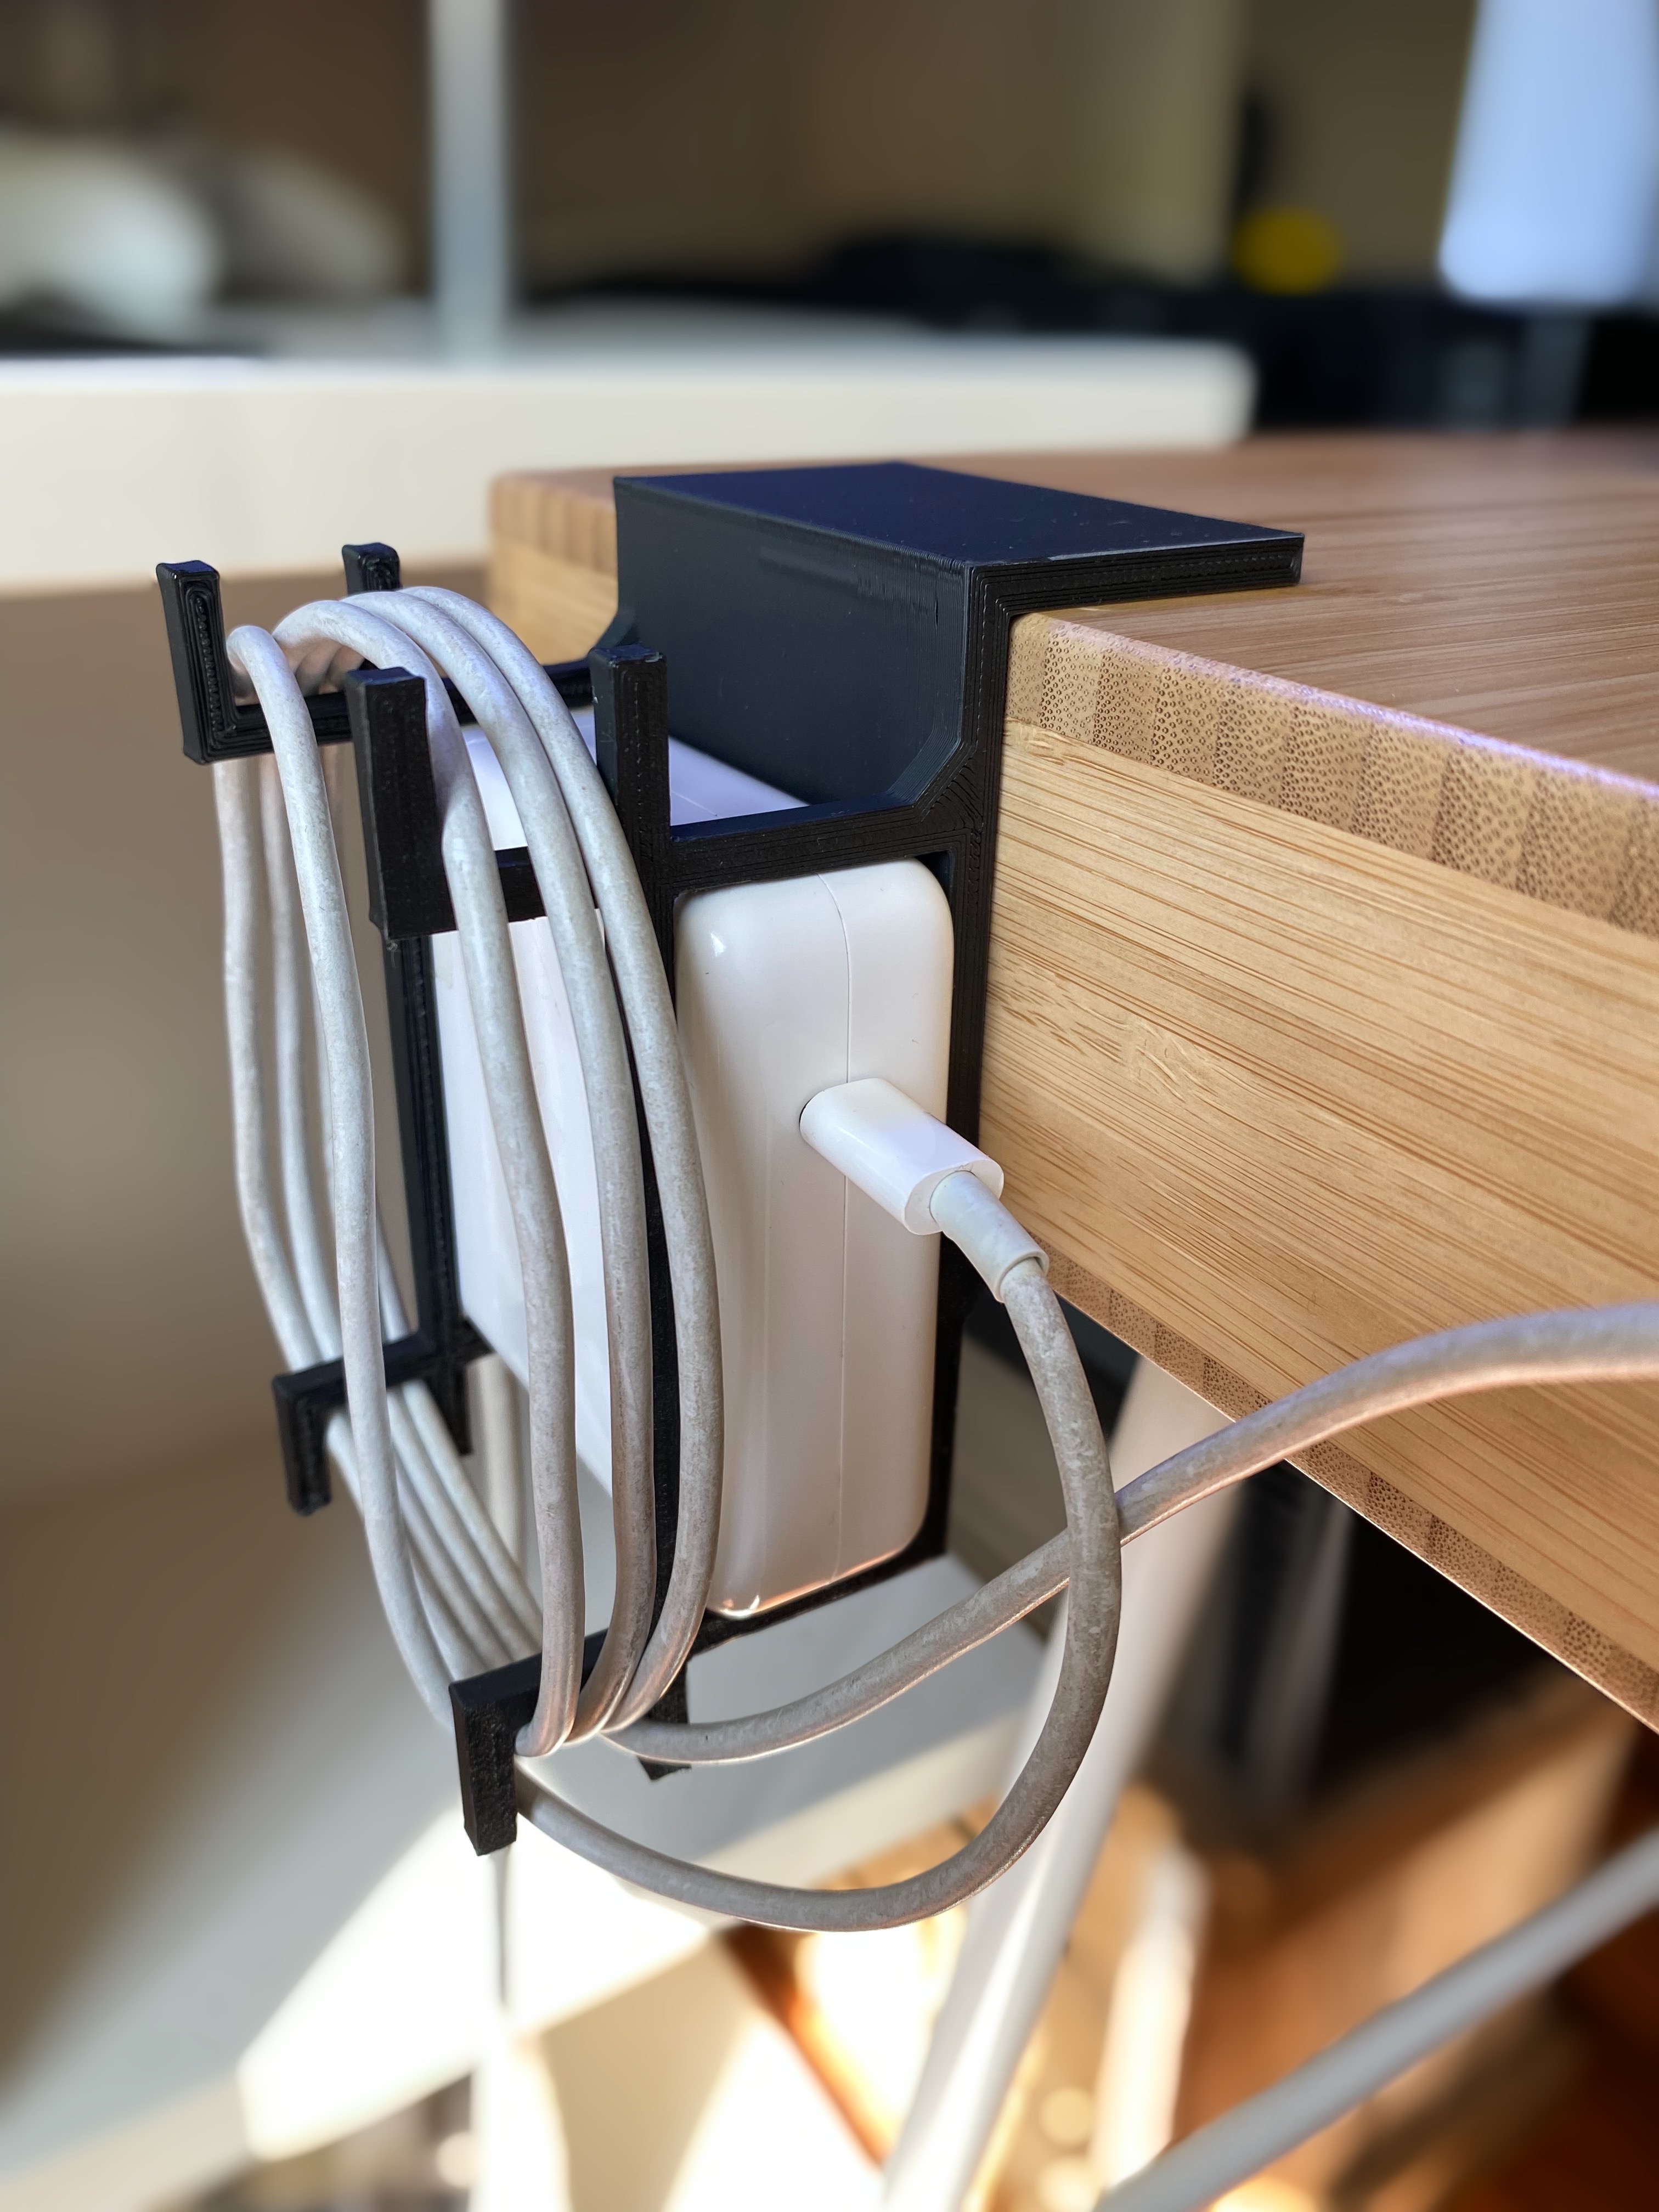 Desk holder for Apple MacBook Pro 87W USB-C Power Adapter and cable (for IKEA Lillåsen desk)